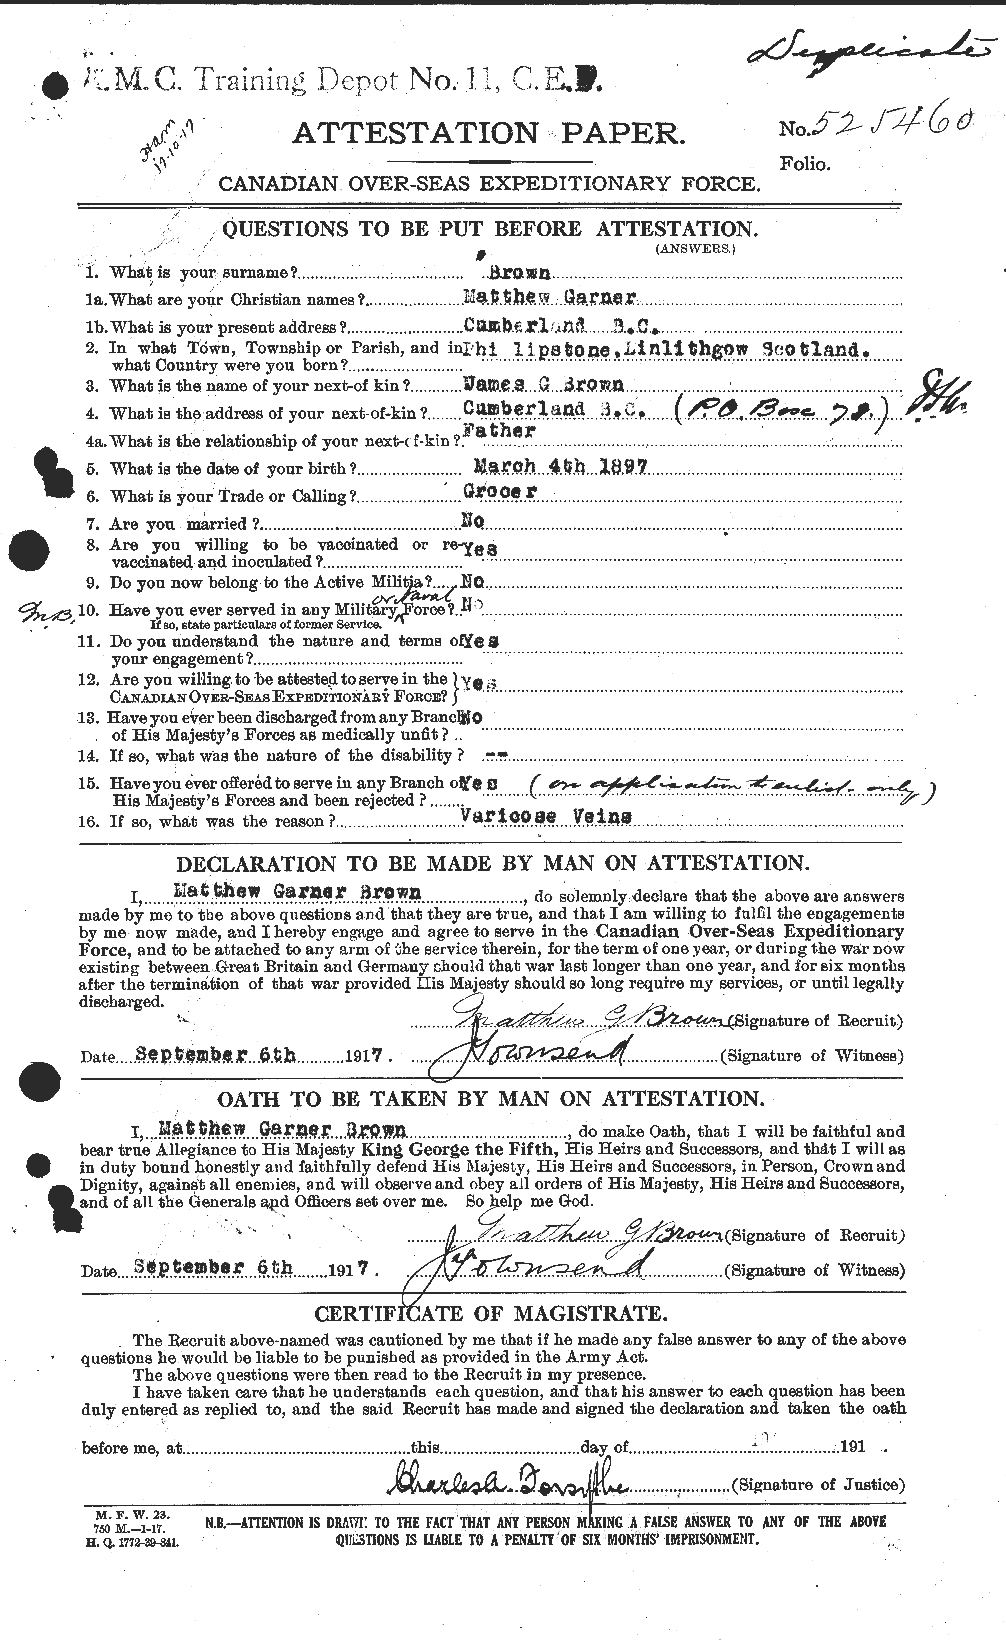 Personnel Records of the First World War - CEF 266370a